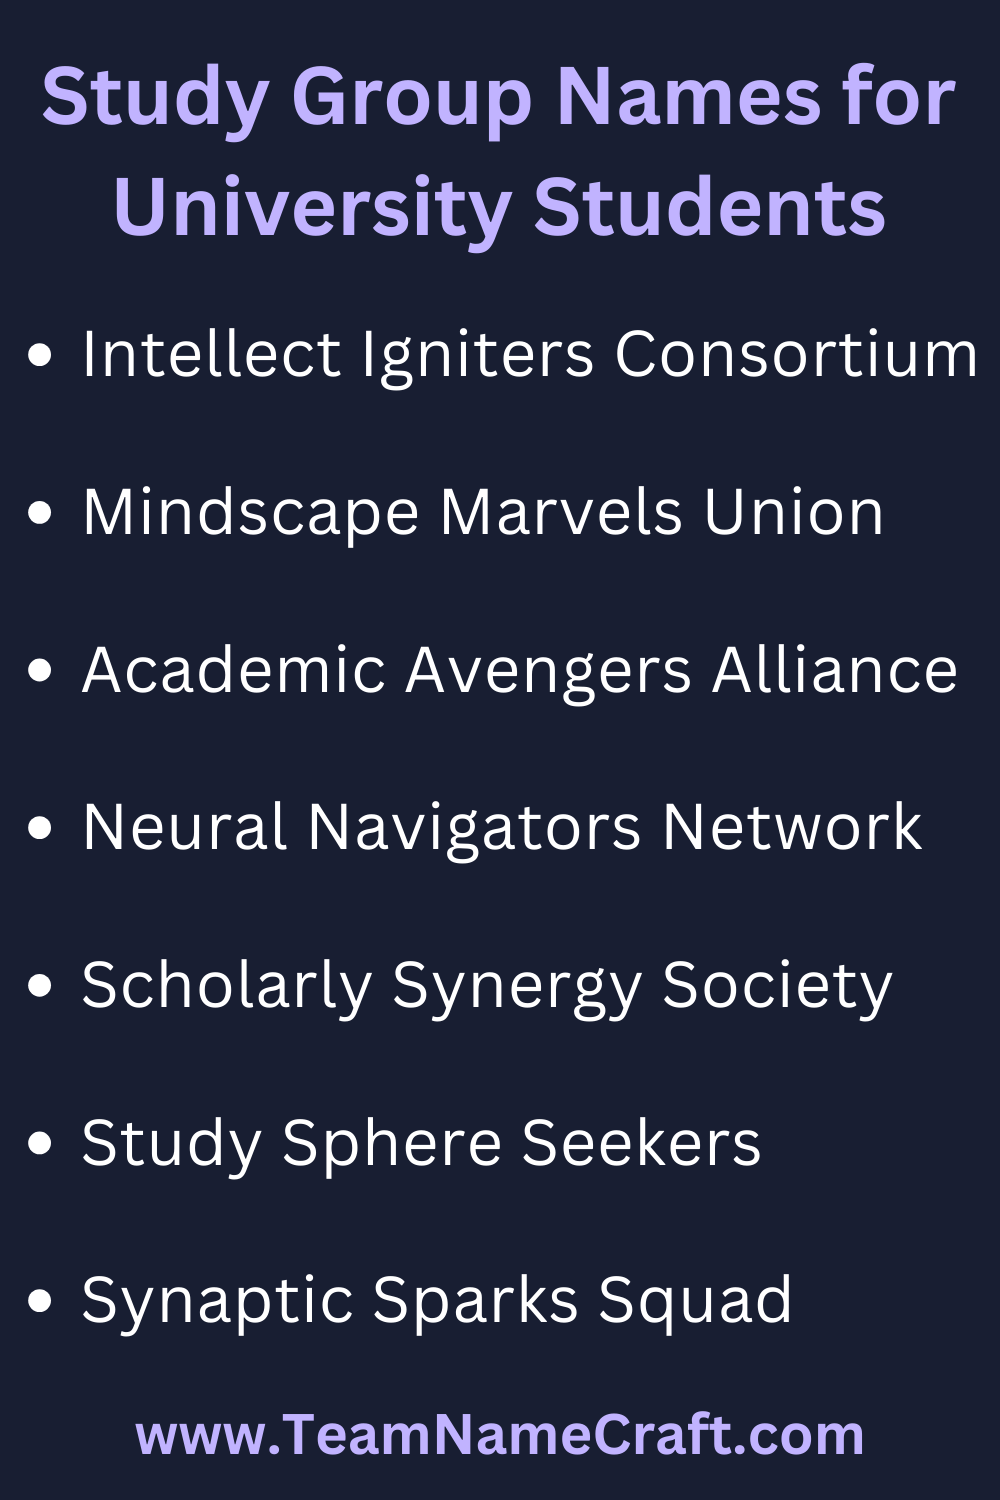 Study Group Names for University Students